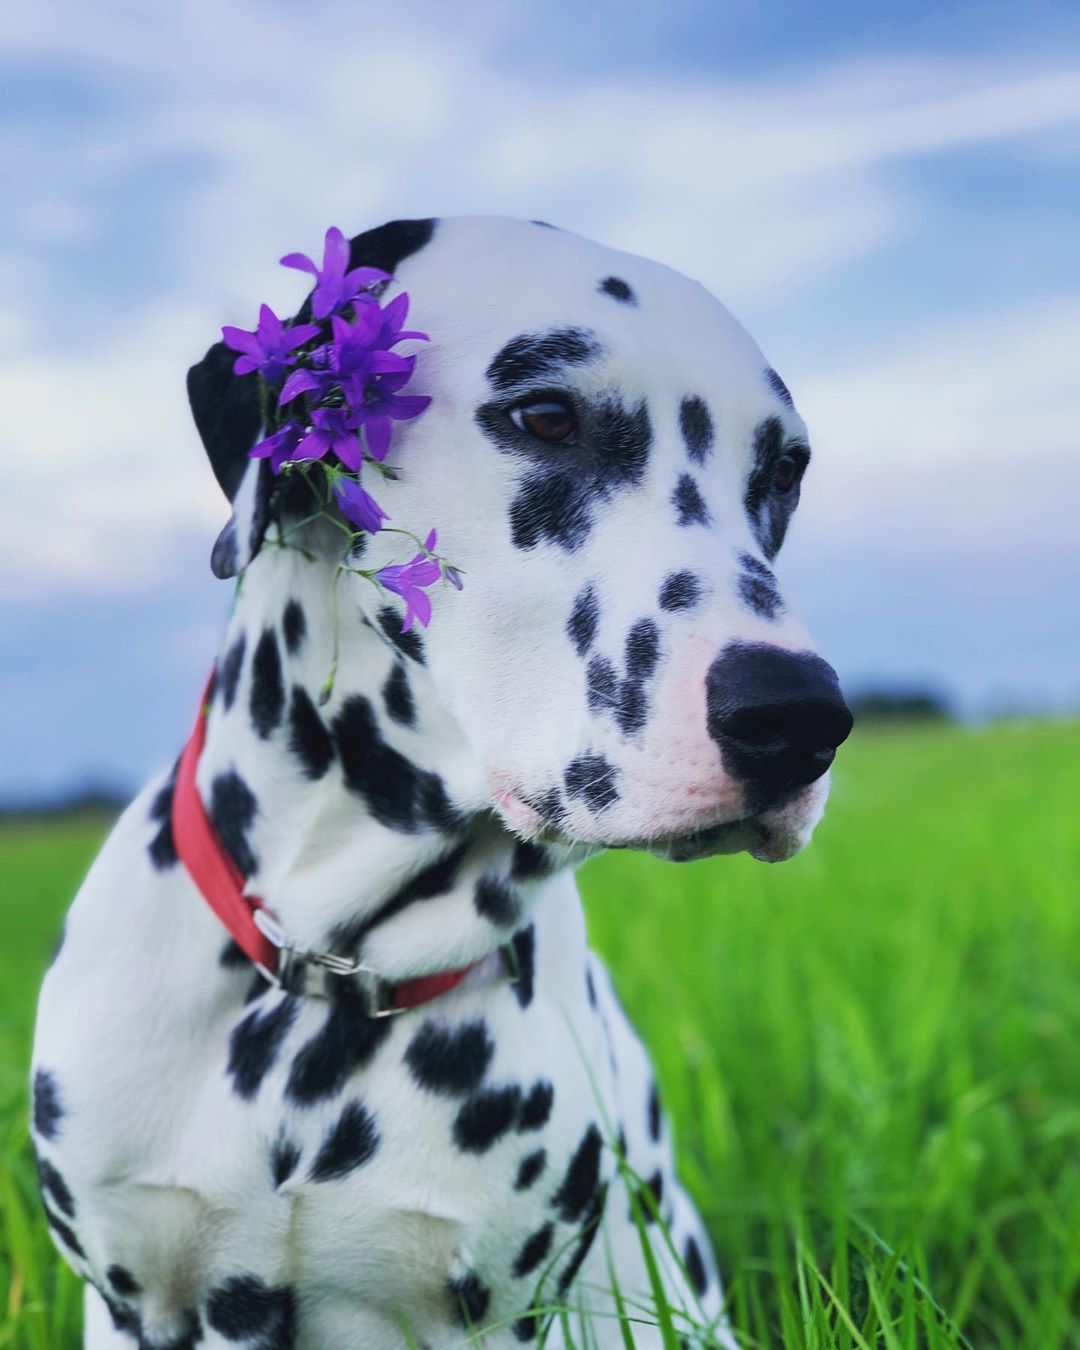 A Dalmatian sitting in the field of grass with purple flowers on its ears